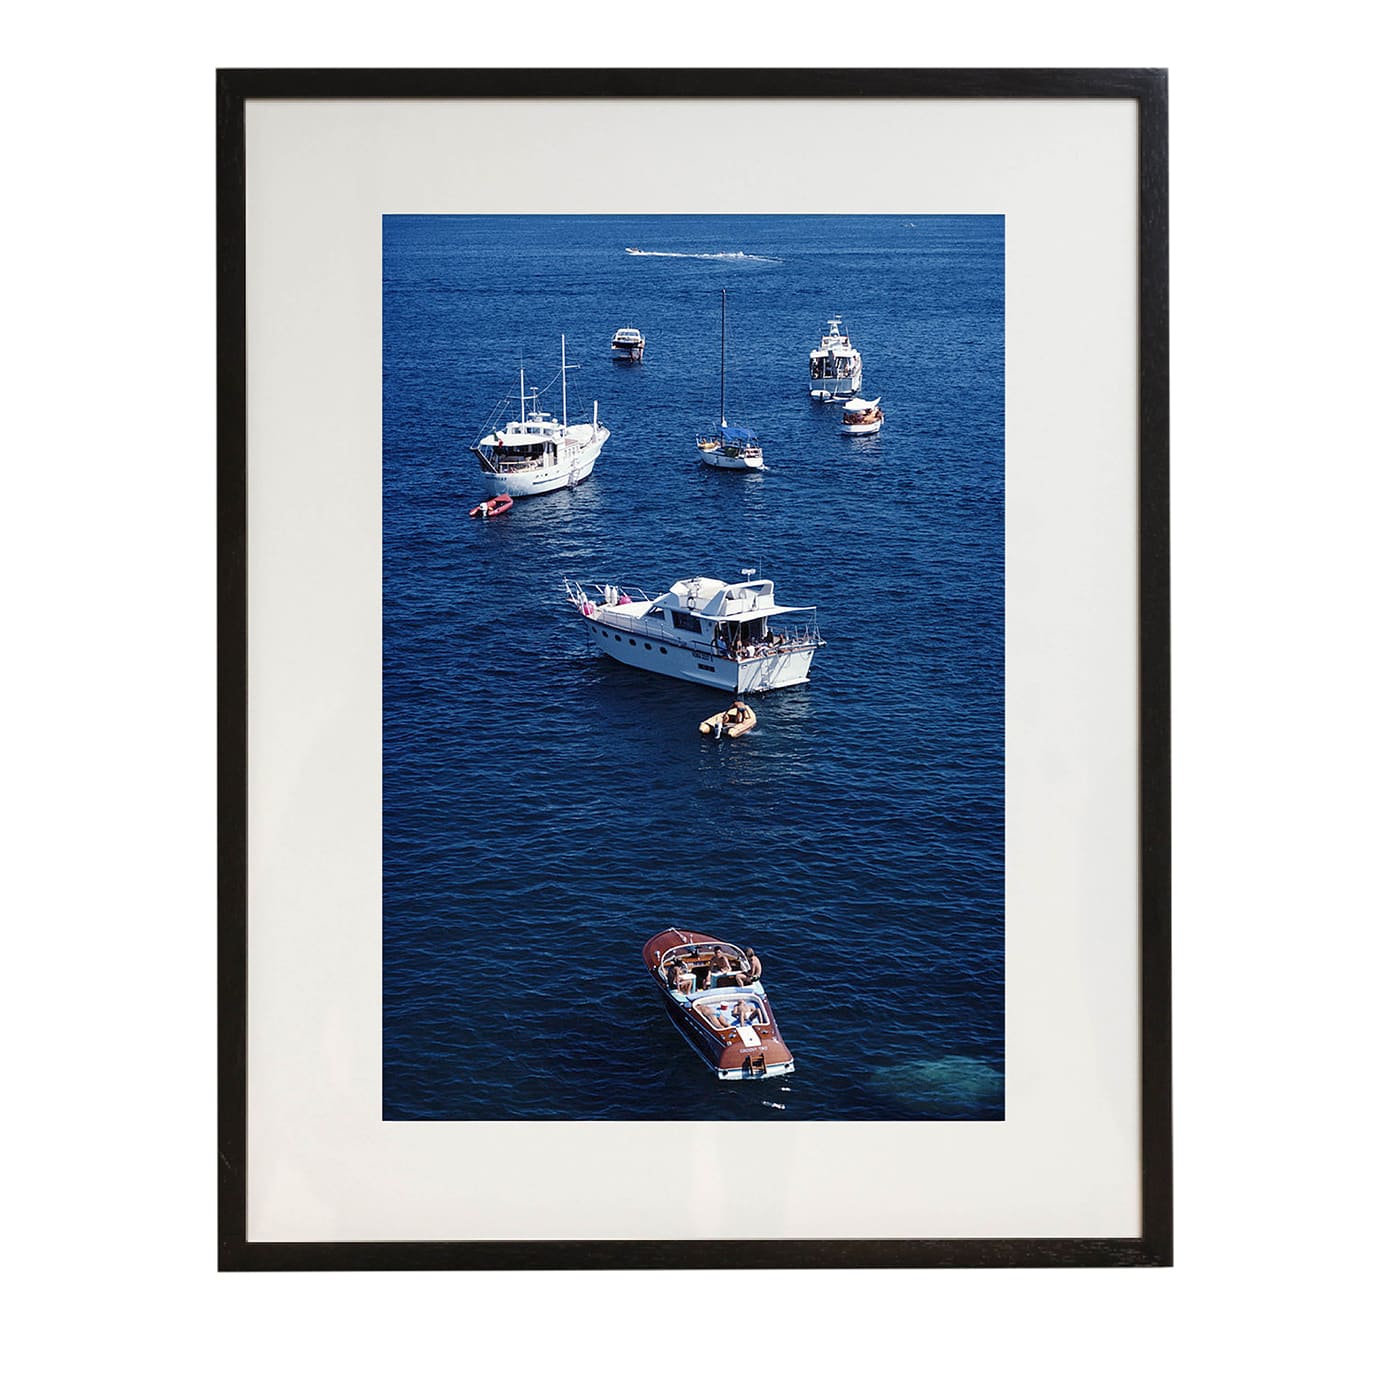 Yachting Holiday Small Framed Print - Getty Images